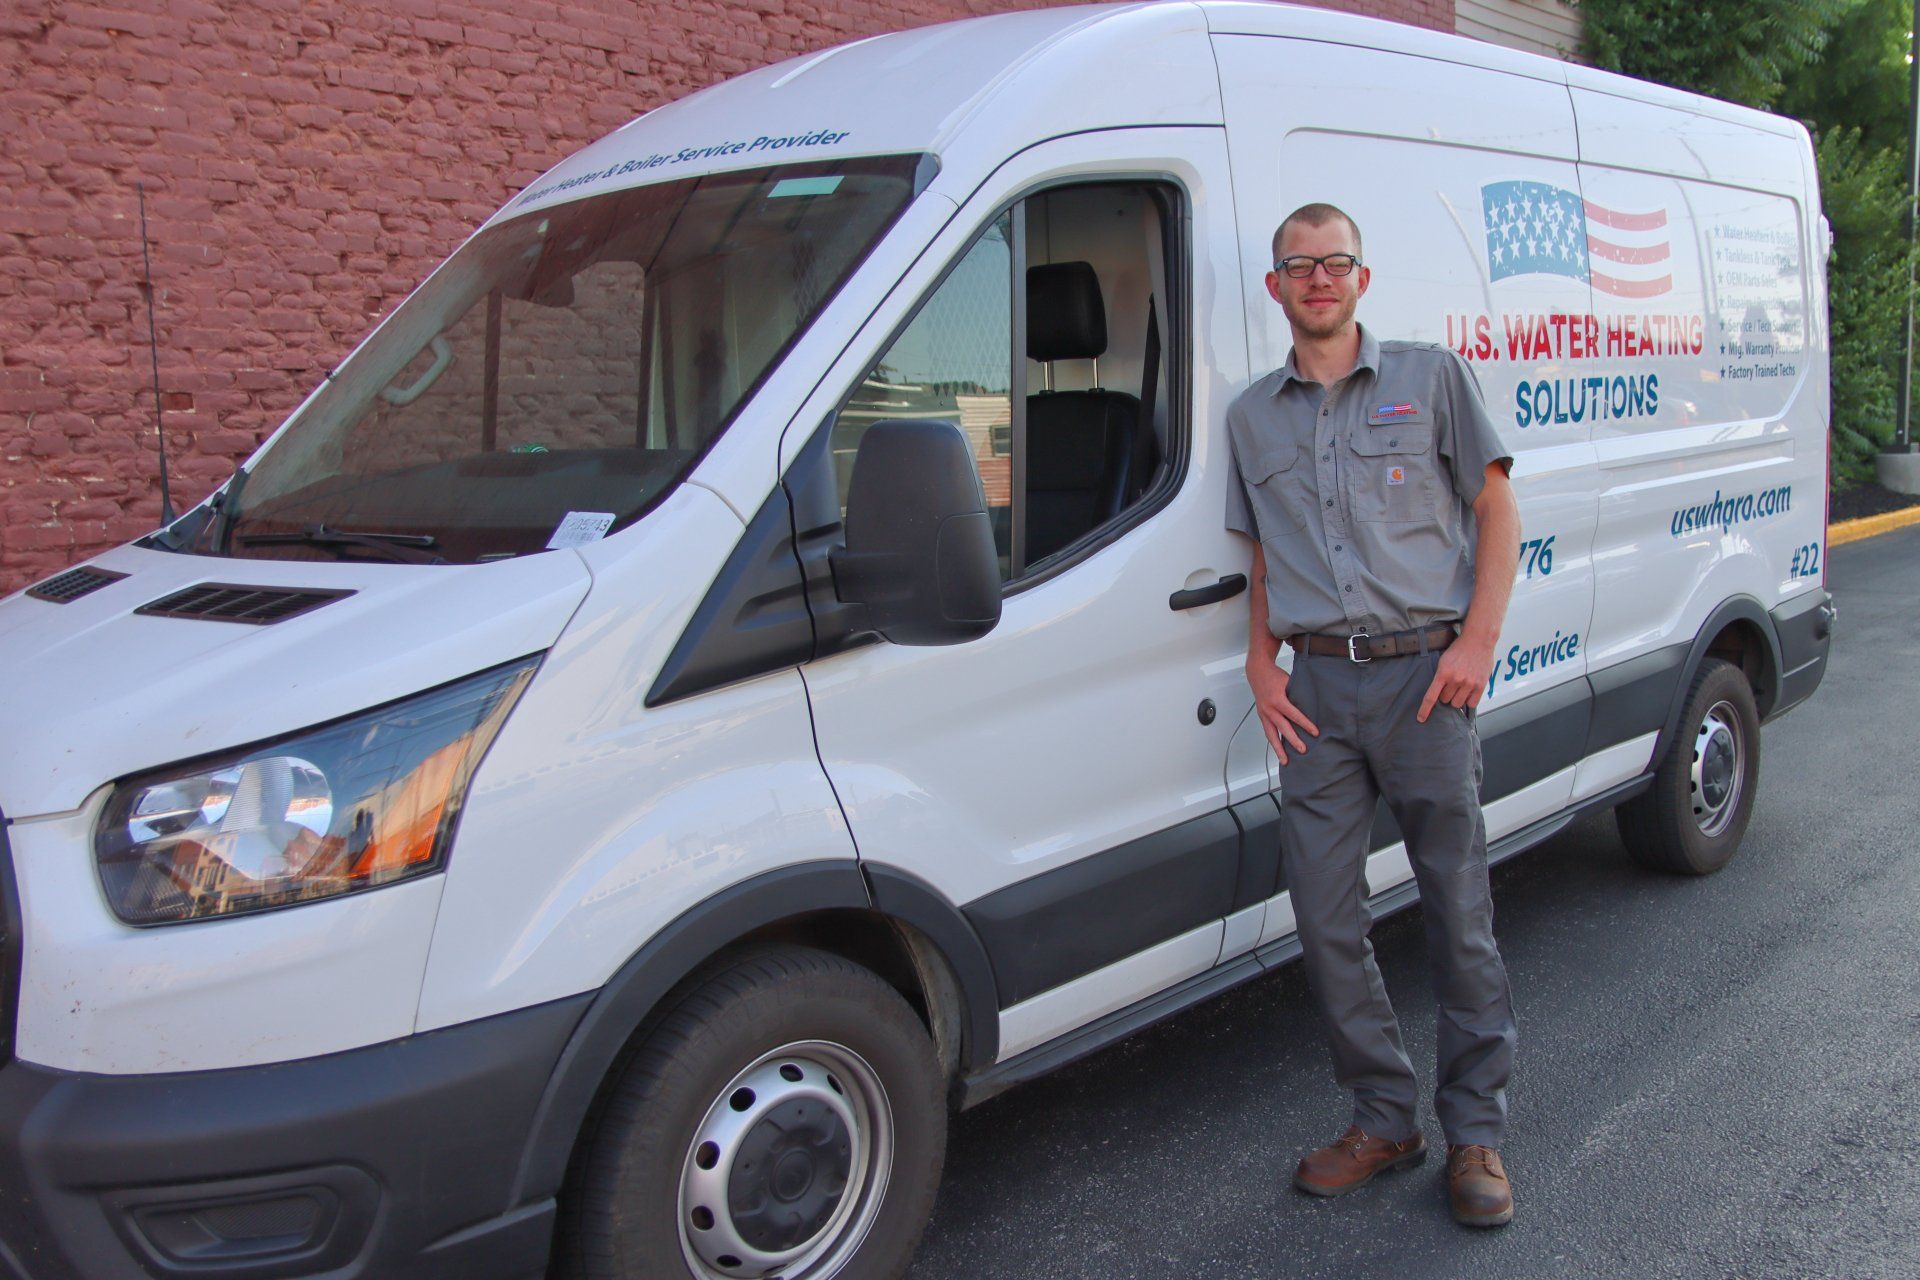 Water Heater Repair Technician Stephen leaning against his uswhpro truck in Winchester, KY